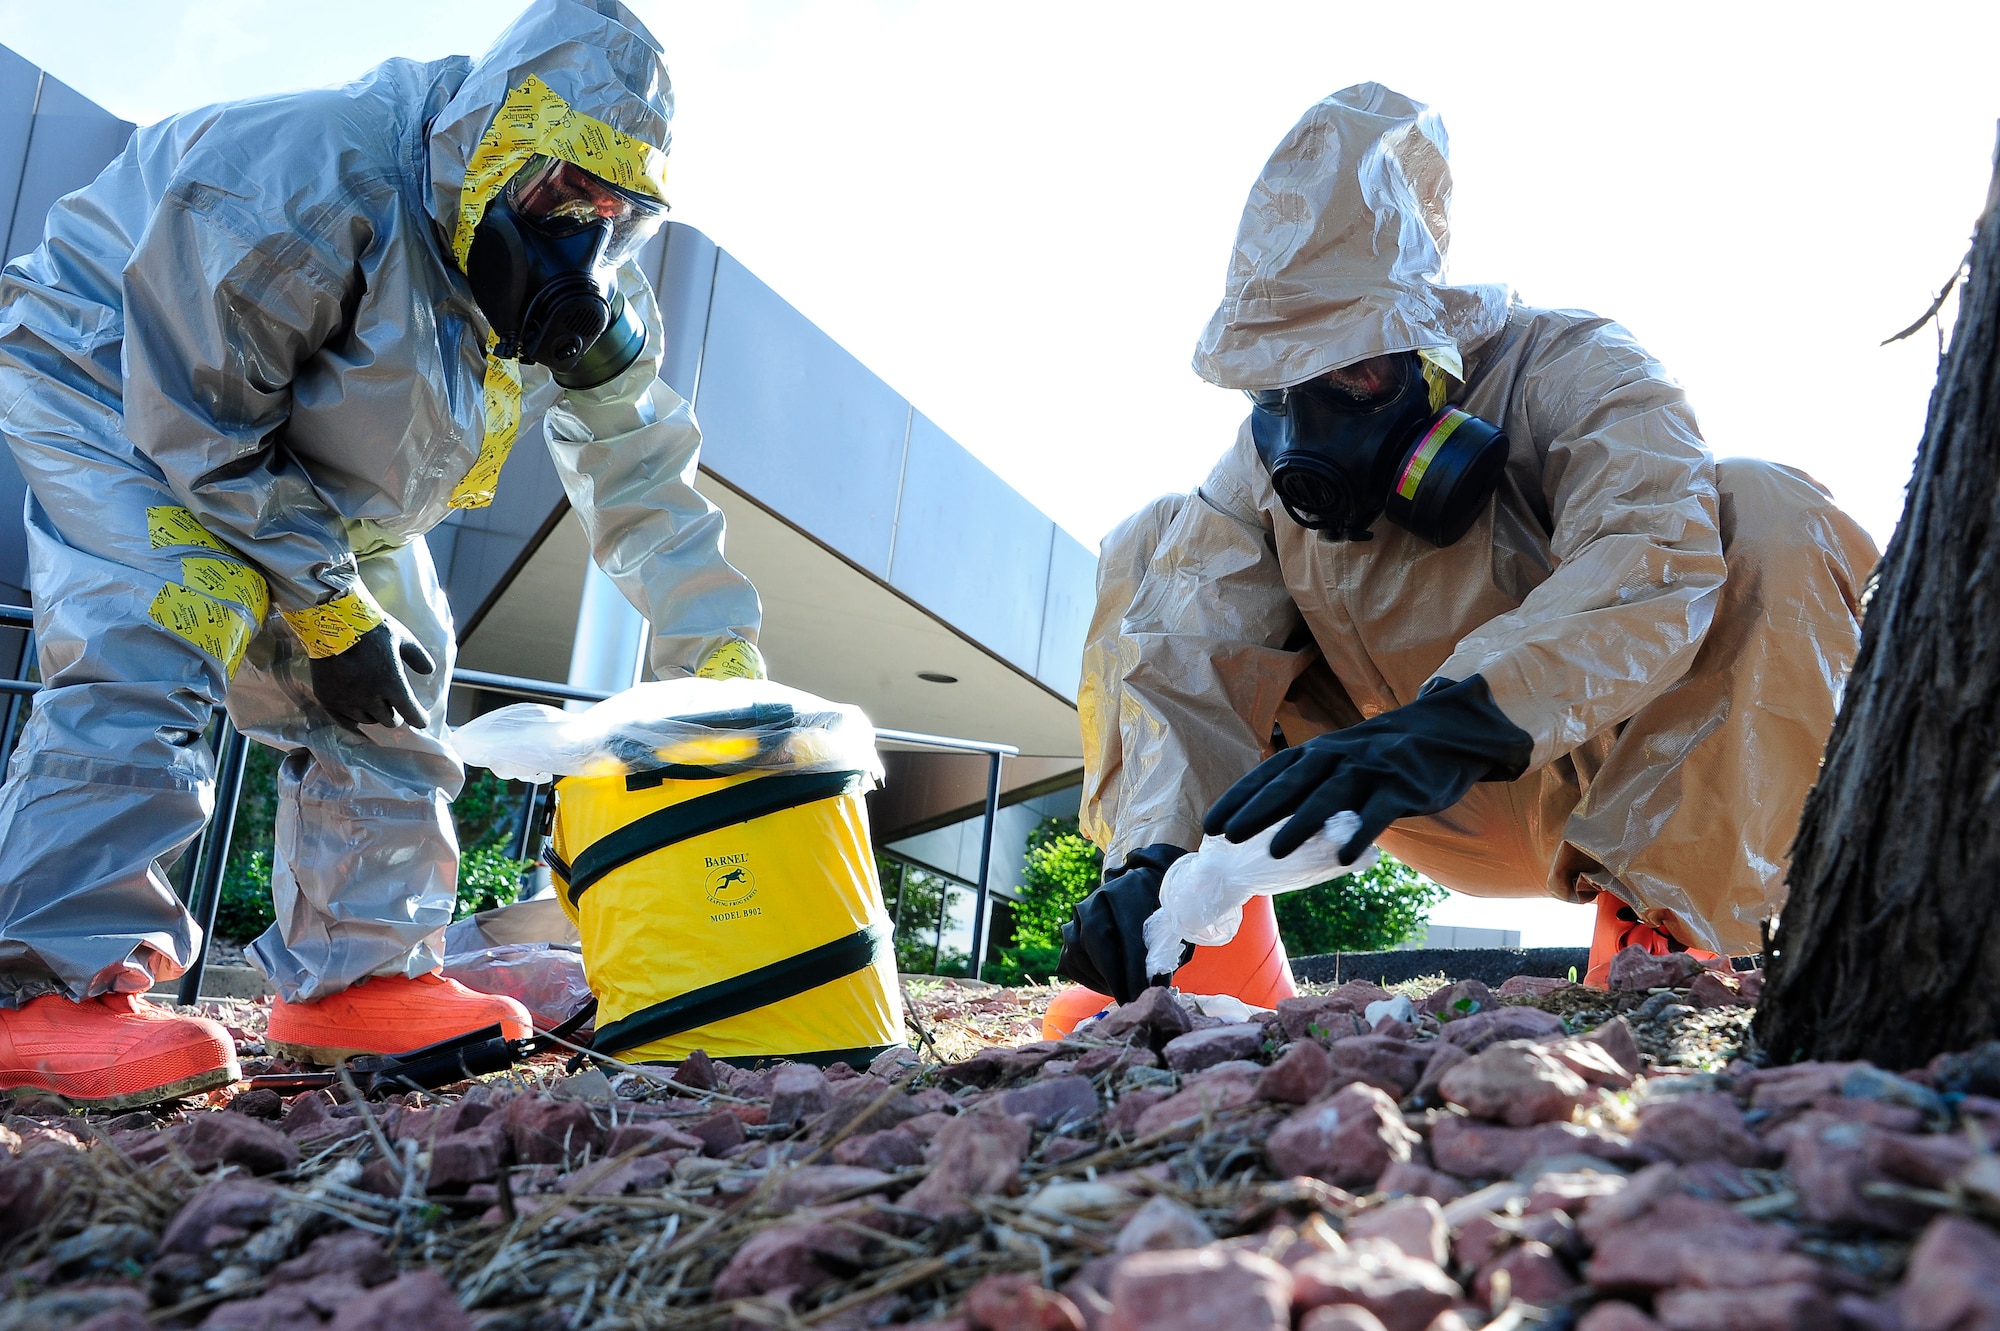 Colorado National Guardsmen Army Staff Sgt. Steve Russ and Sgt. Robert Chavez from the 8th Civil Support Team dispose hazardous material they found when they conducted a search and decontamination due to a notional F4 tornado that tore through the Bonfils Blood Center in Denver during the Vigilant Guard Exercise July 23. Vigilant Guard is an exercise focused on preparing for domestic emergencies and catastrophic events through interagency coordination.(U.S. Air National Guard photo by Staff Sgt. Nicole Manzanares)